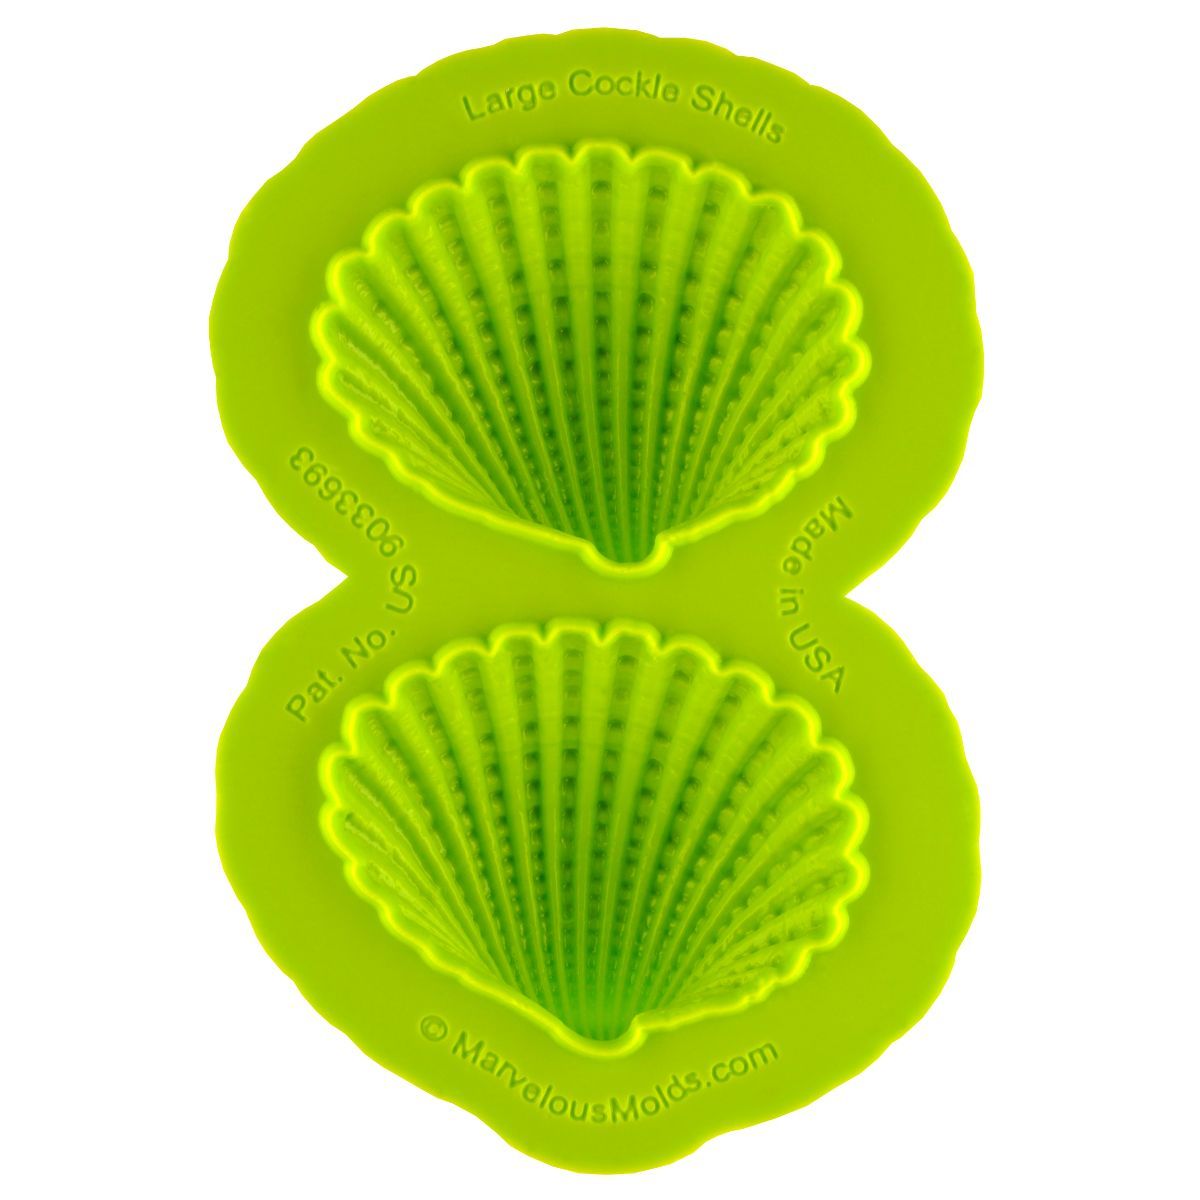 Large Cockle Shells Mold - Bake Supply Plus